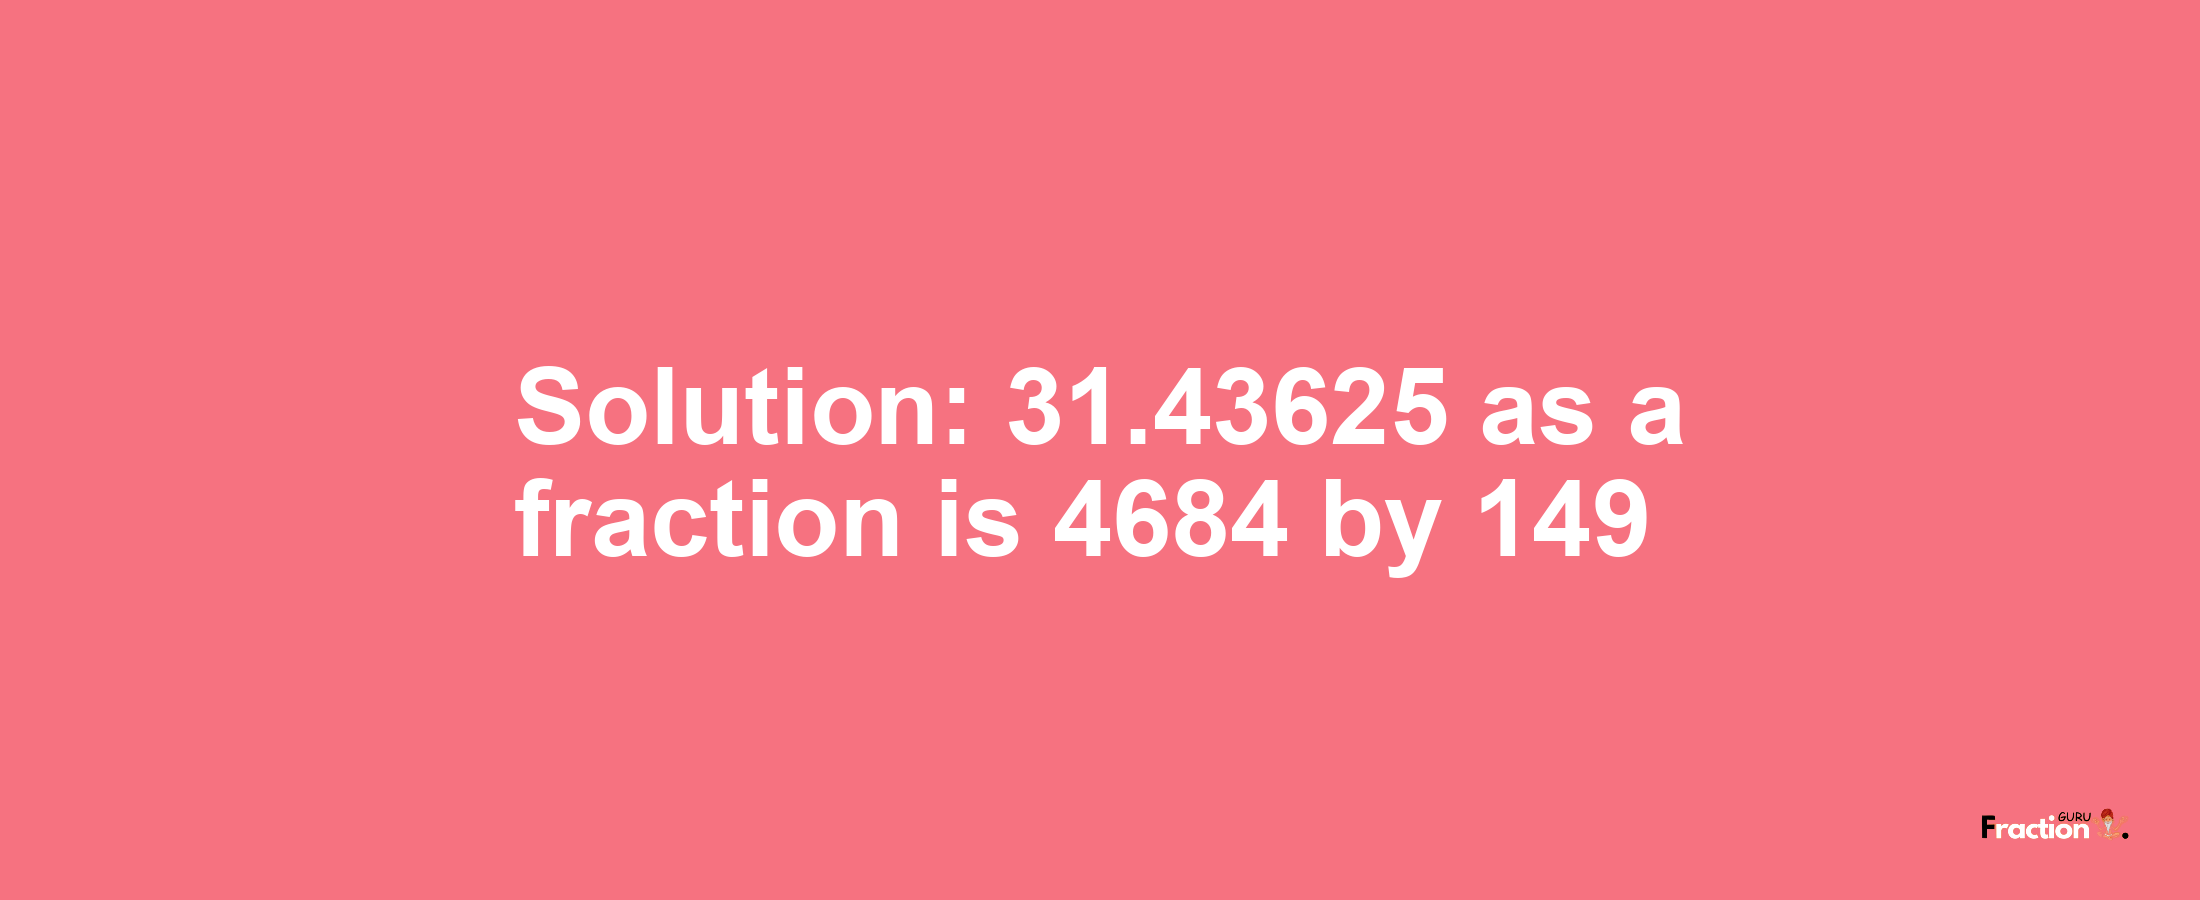 Solution:31.43625 as a fraction is 4684/149